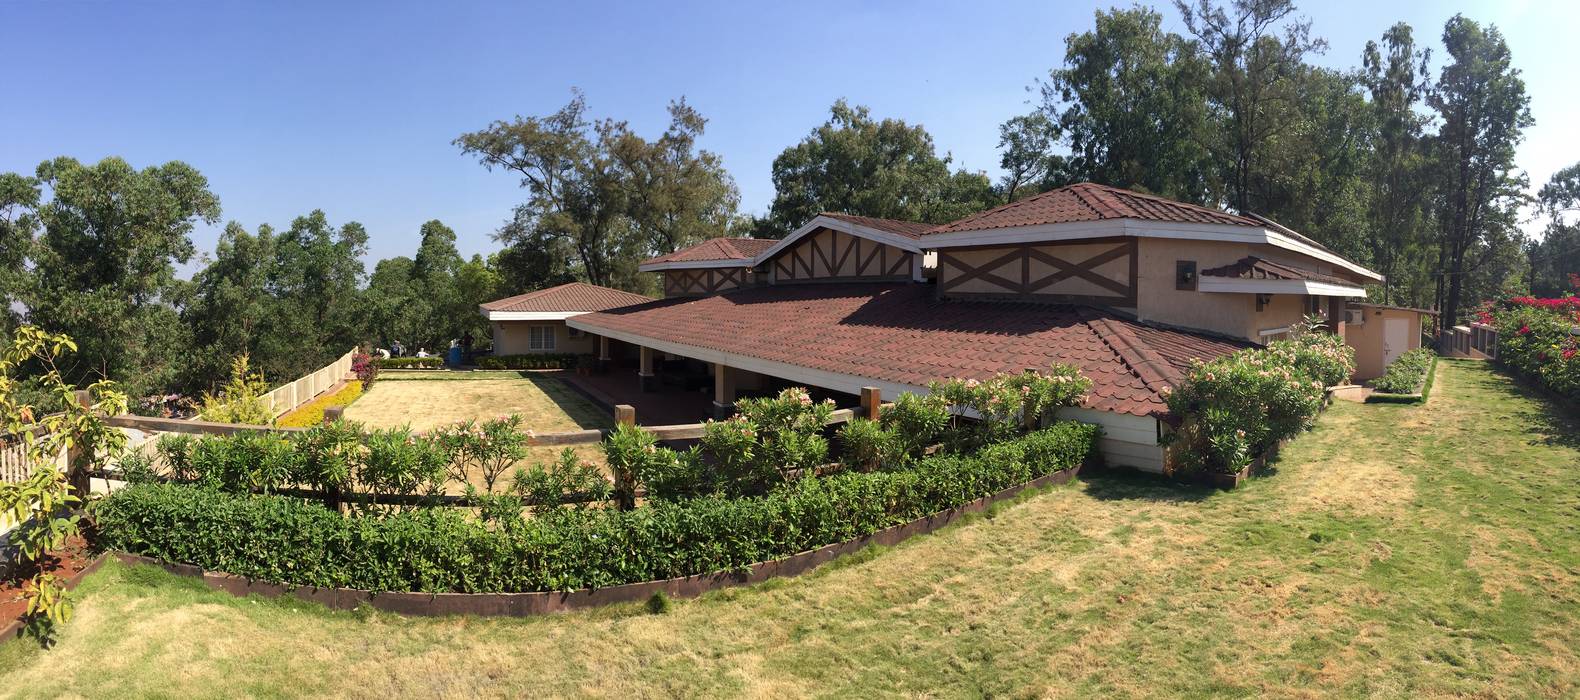 Villa,Panchgani, Ground 11 Architects Ground 11 Architects Country style houses